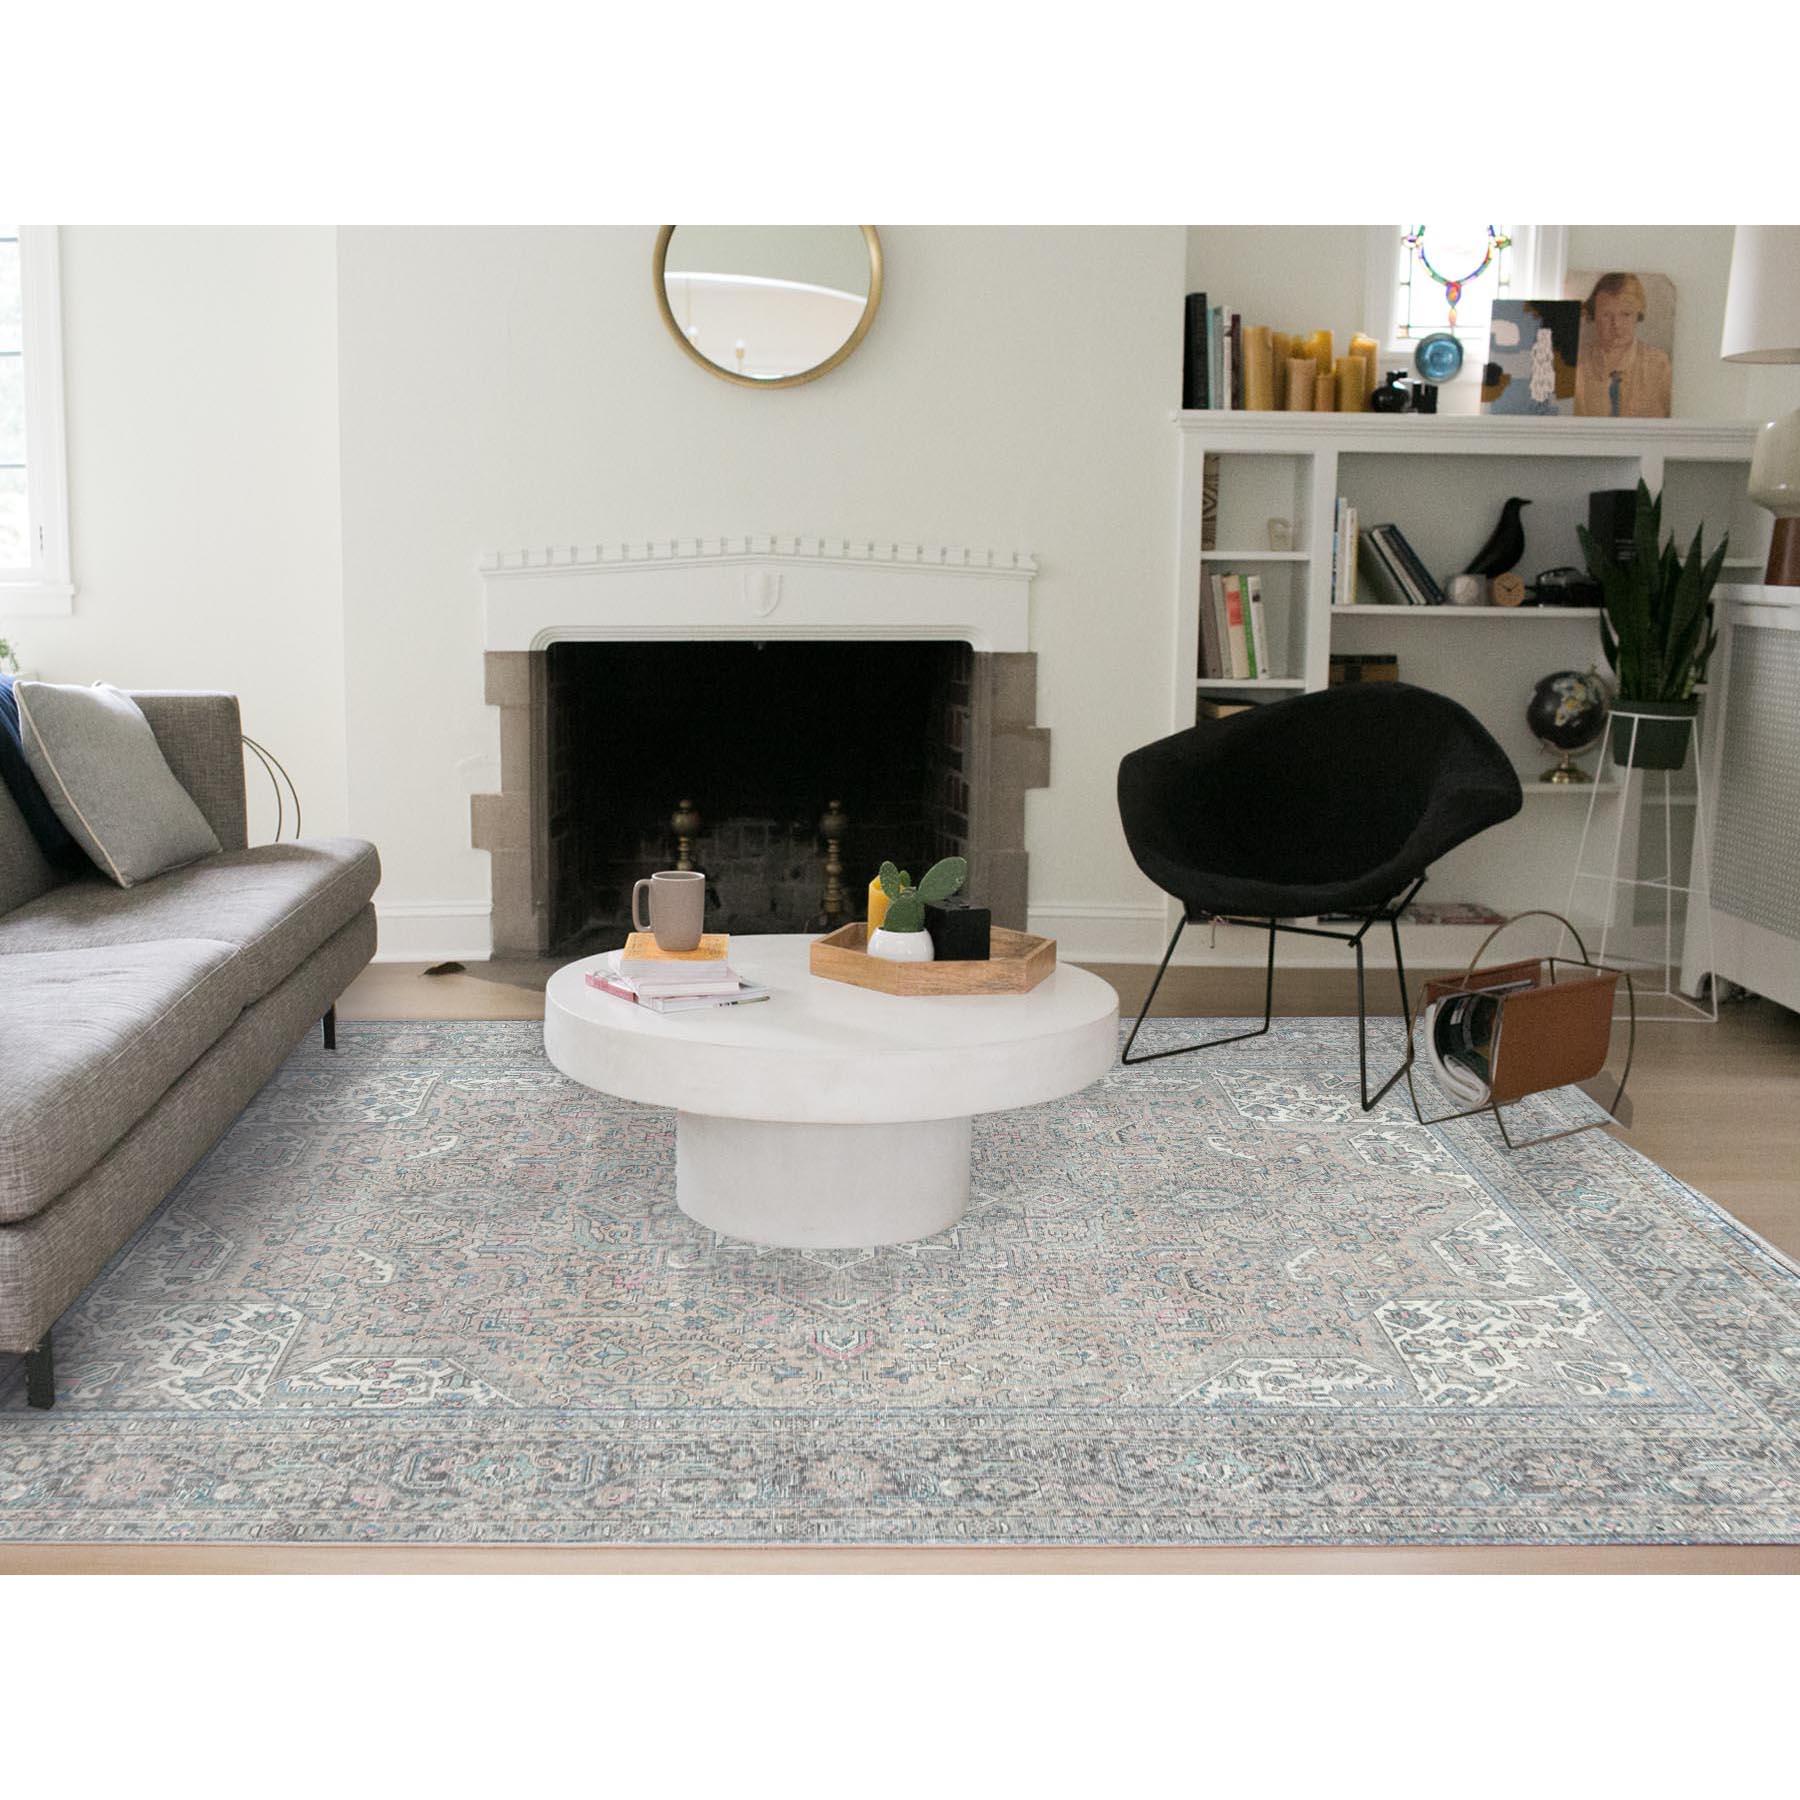 This fabulous hand-knotted carpet has been created and designed for extra strength and durability. This rug has been handcrafted for weeks in the traditional method that is used to make
Exact Rug Size in Feet and Inches: 9'5